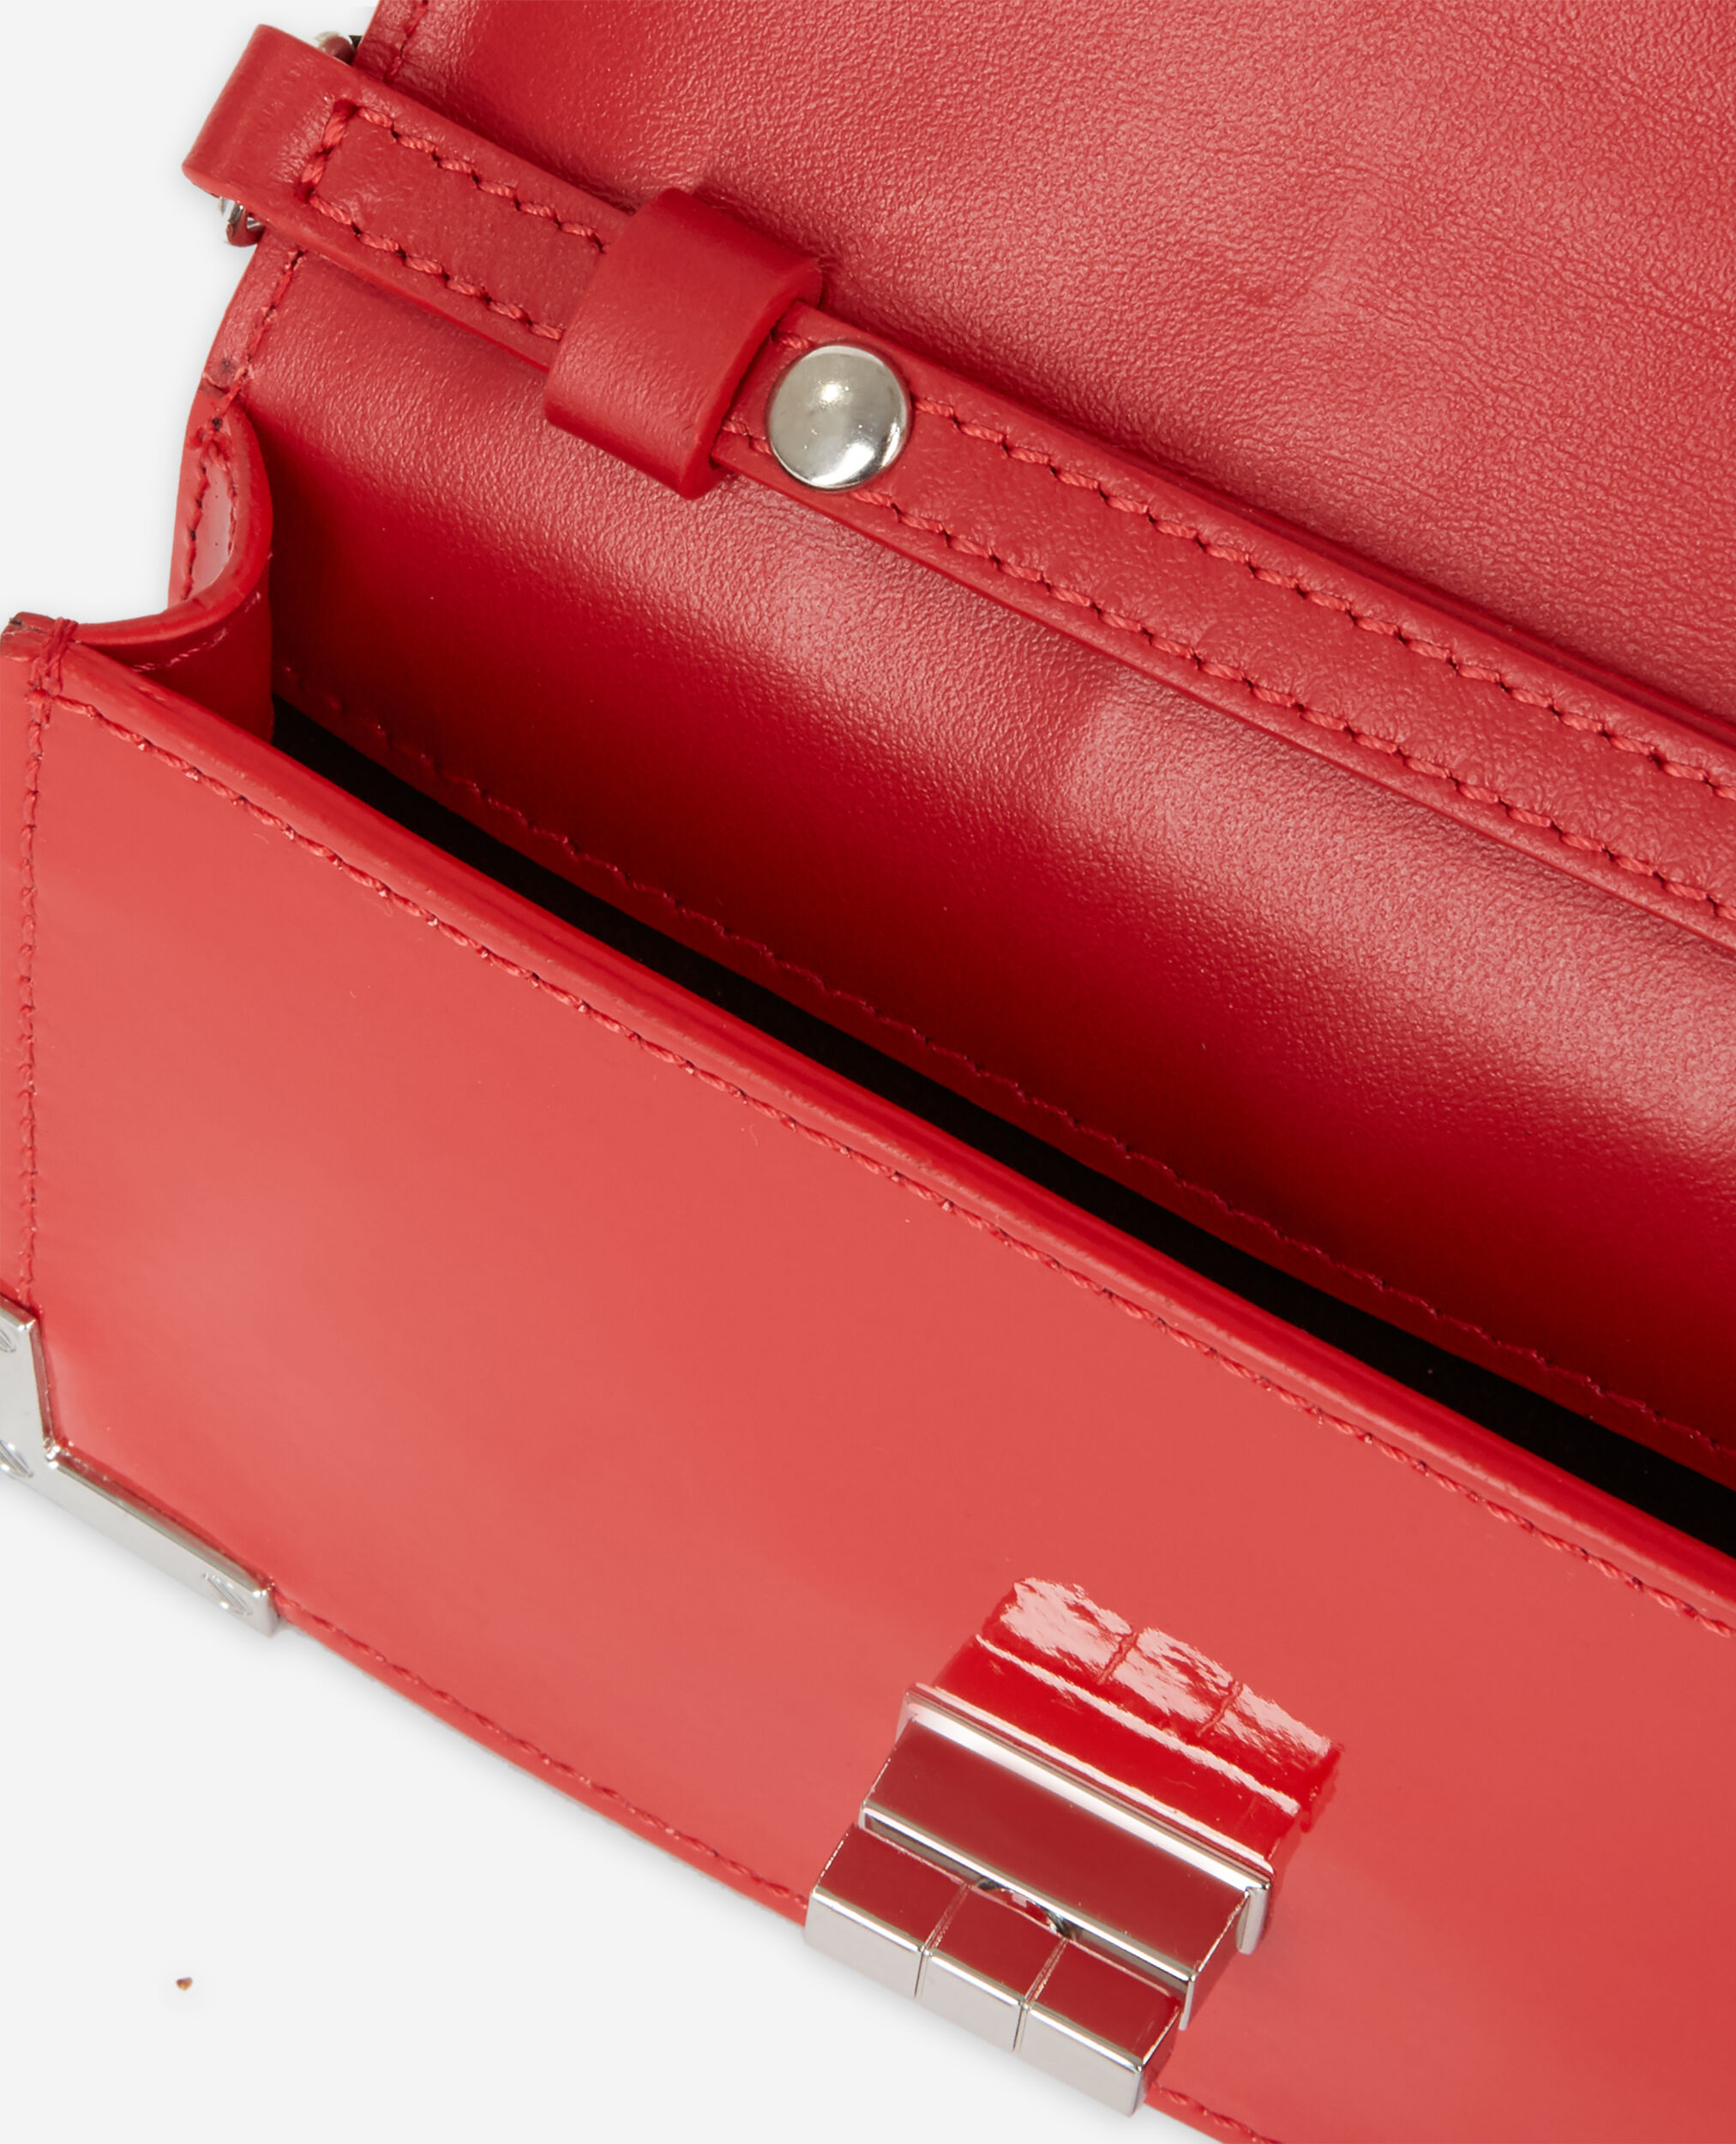 Bolso mano Emily pequeÃ±o piel rojo, RED, hi-res image number null